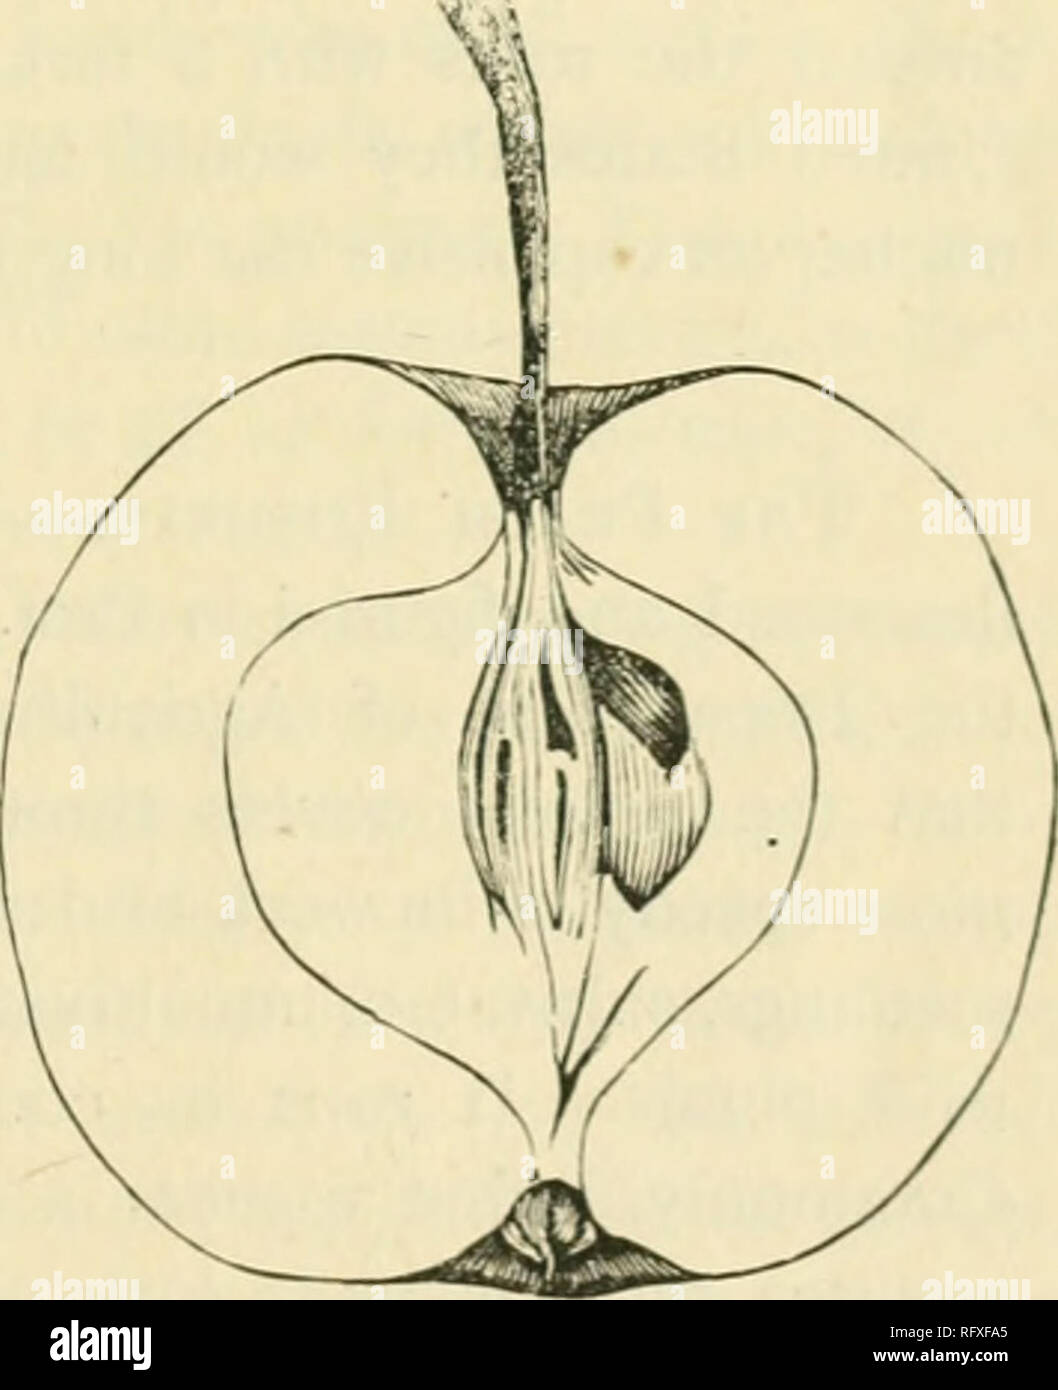 . The Canadian horticulturist [monthly], 1892. Gardening; Canadian periodicals. Fig. 53.—Gibb Crab. Fig. 54. -Orange Crab. plum of the Yellow Gage type, yet too sweet for constant use. Season, from September 15 to 30th.&quot; In the IViscofisin Horticulturist for 1884 this is classed among the &quot;six best crabs.&quot; Wherever this has been introduced in the Pro- vince of Quebec it is highly esteemed as a canning crab. It is thinner skinned and much less astringent than either Hyslop or Montreal Beauty, in fact, less. Please note that these images are extracted from scanned page images that Stock Photo